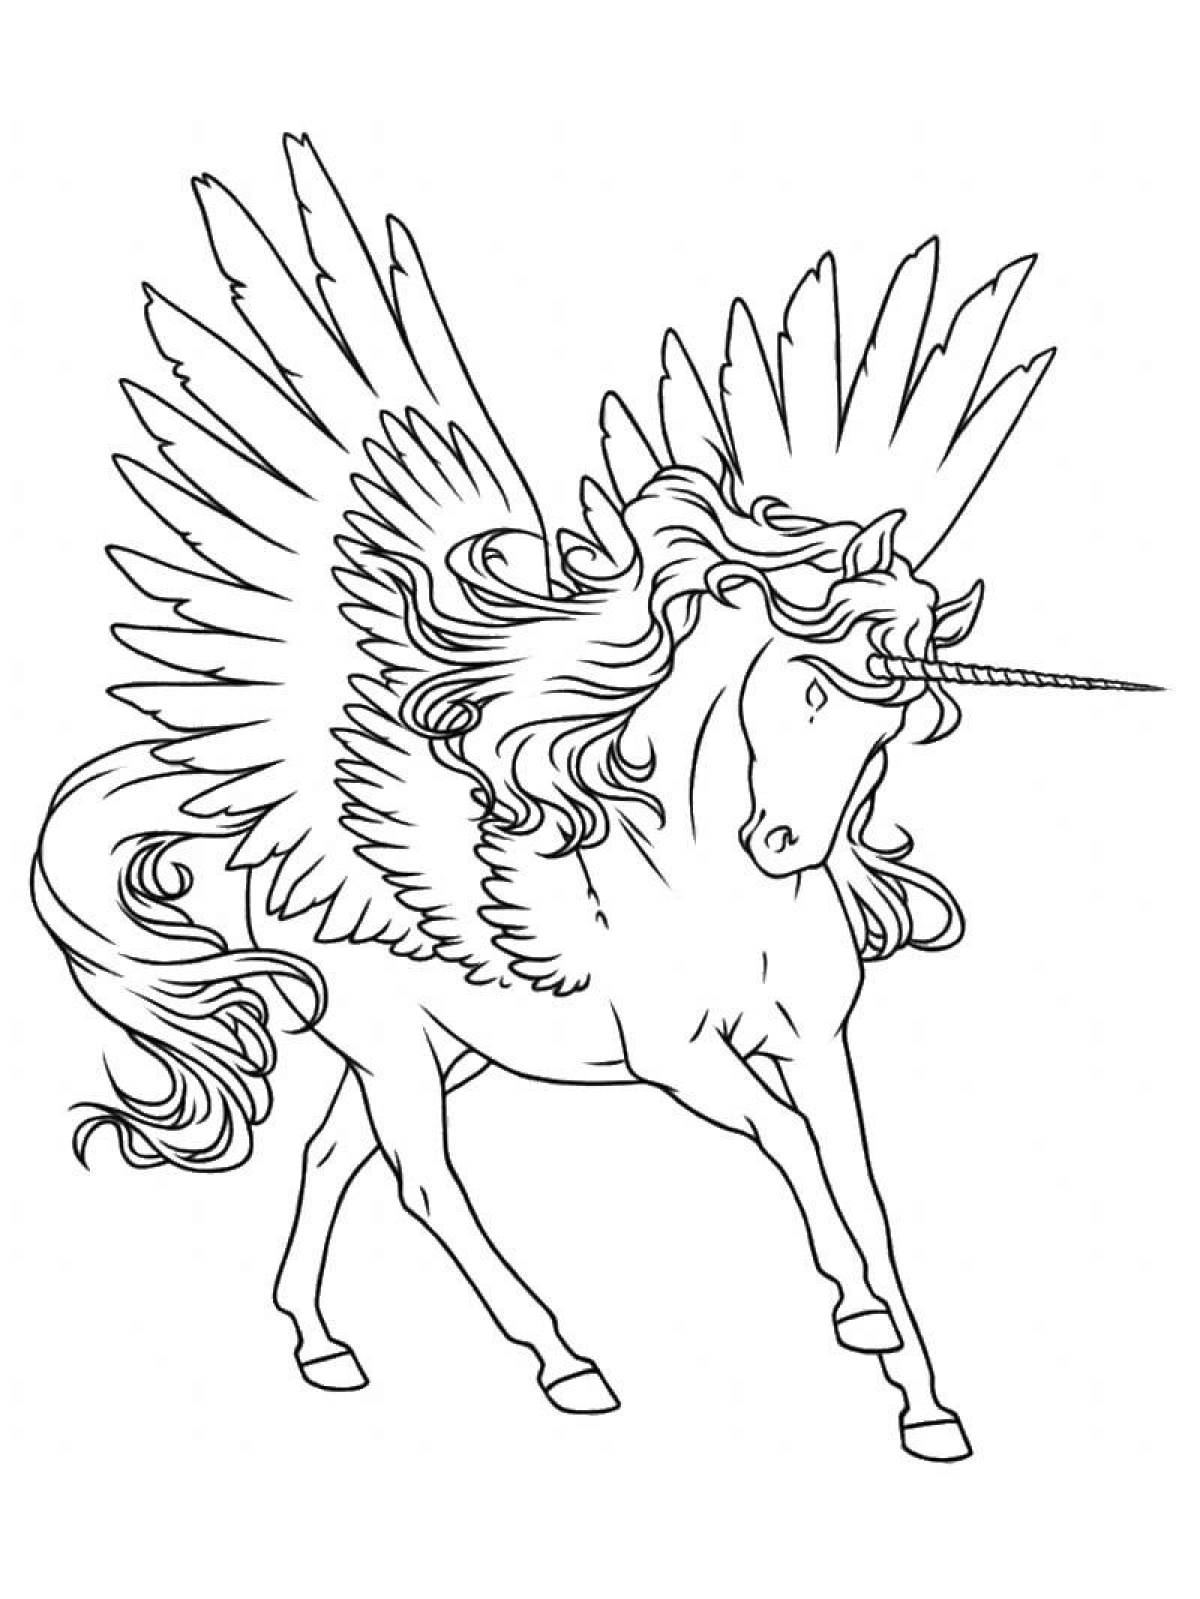 Unicorn with wings #2